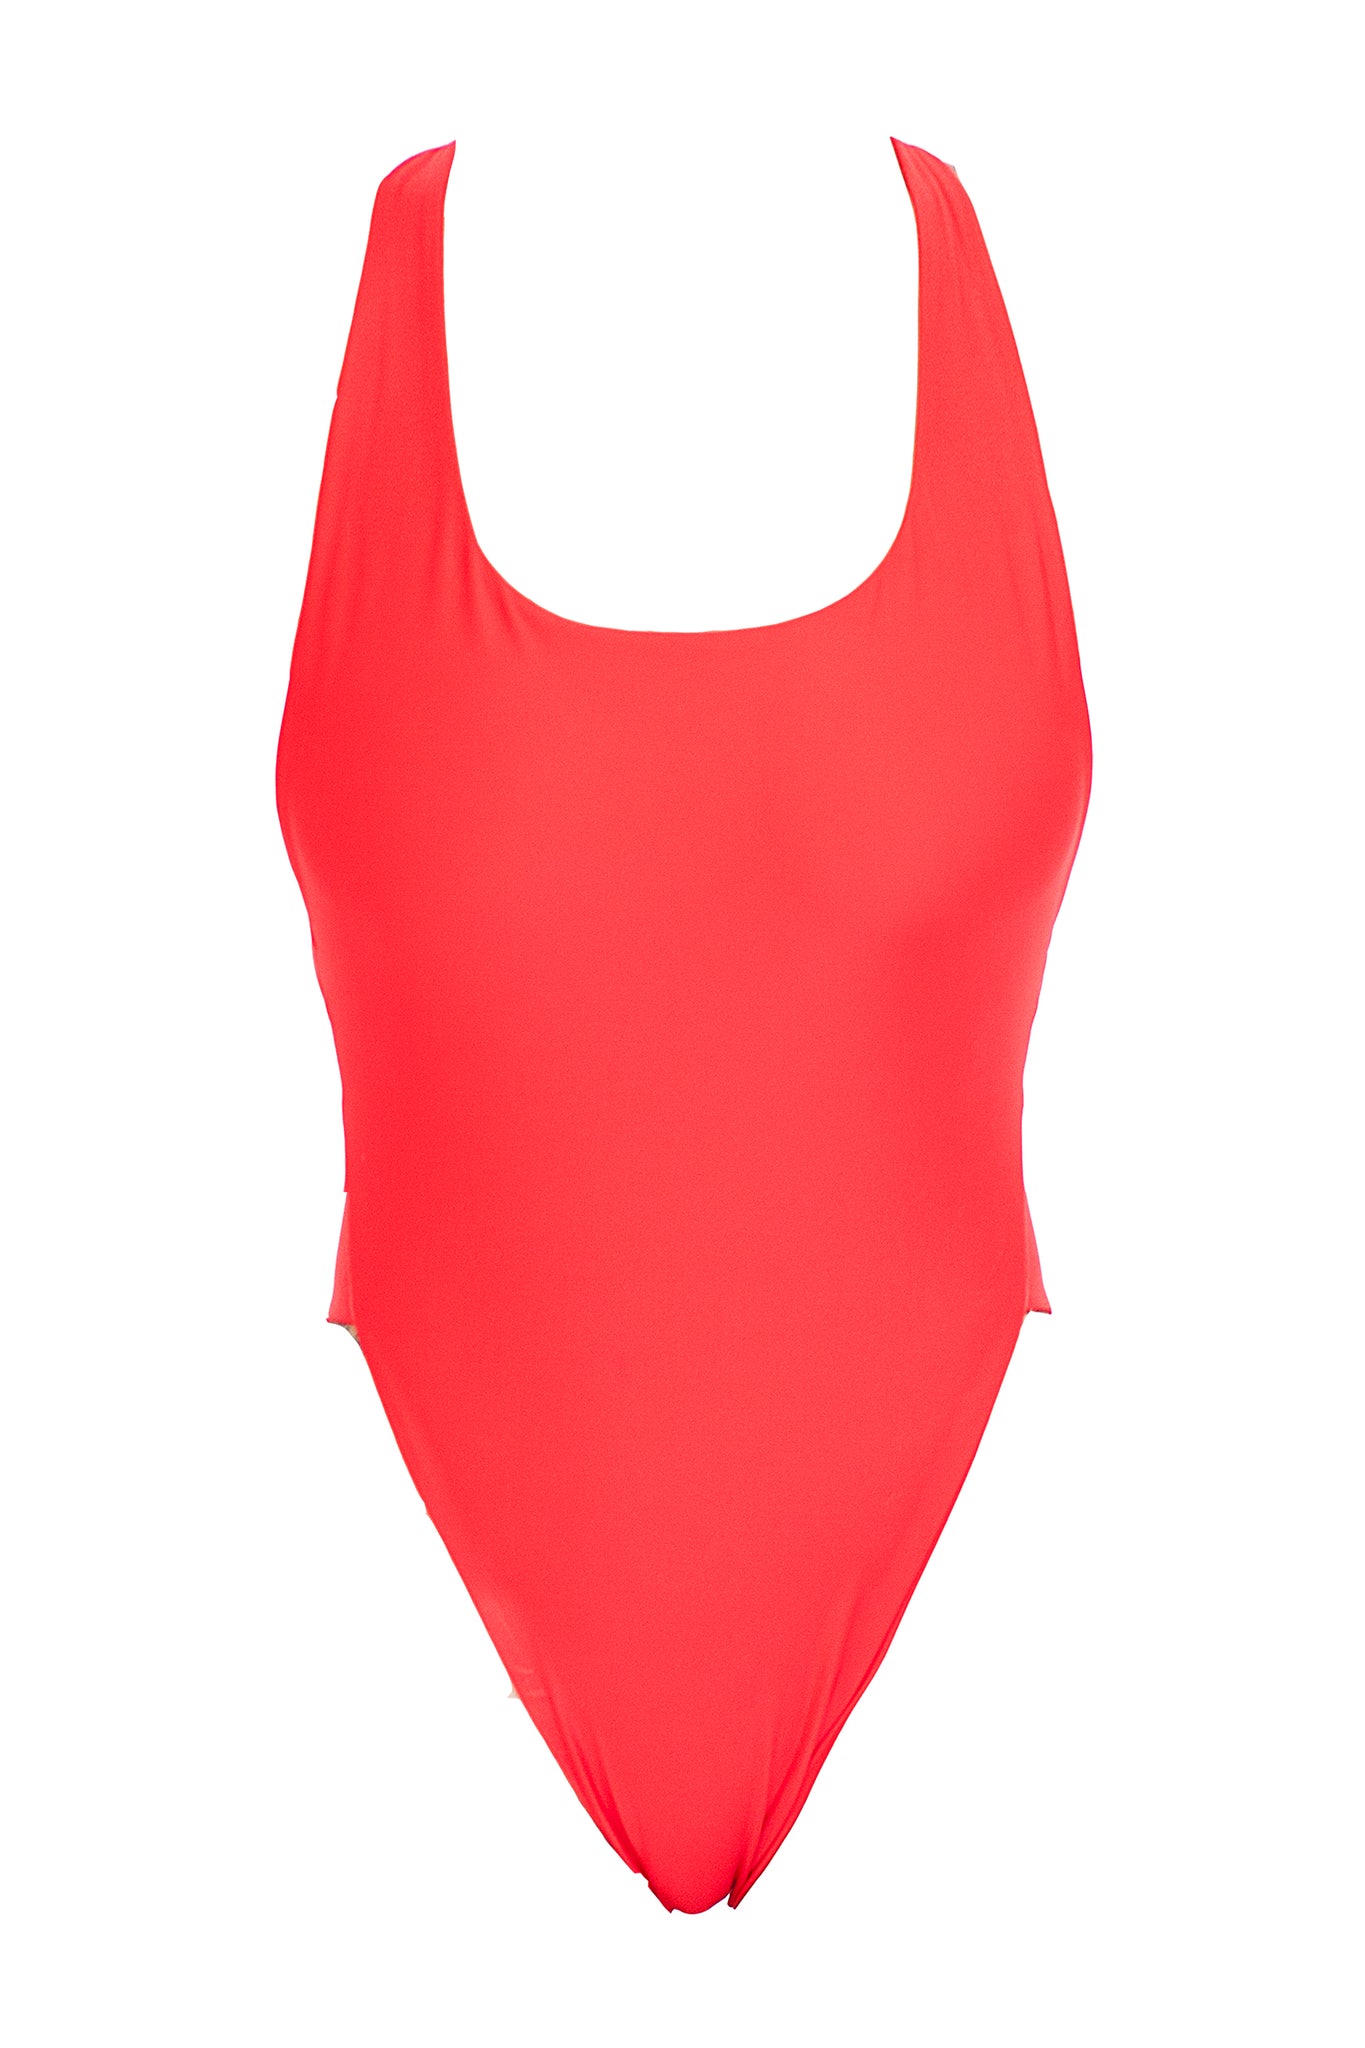 A red high-cut one piece swimsuit with supportive thick straps.